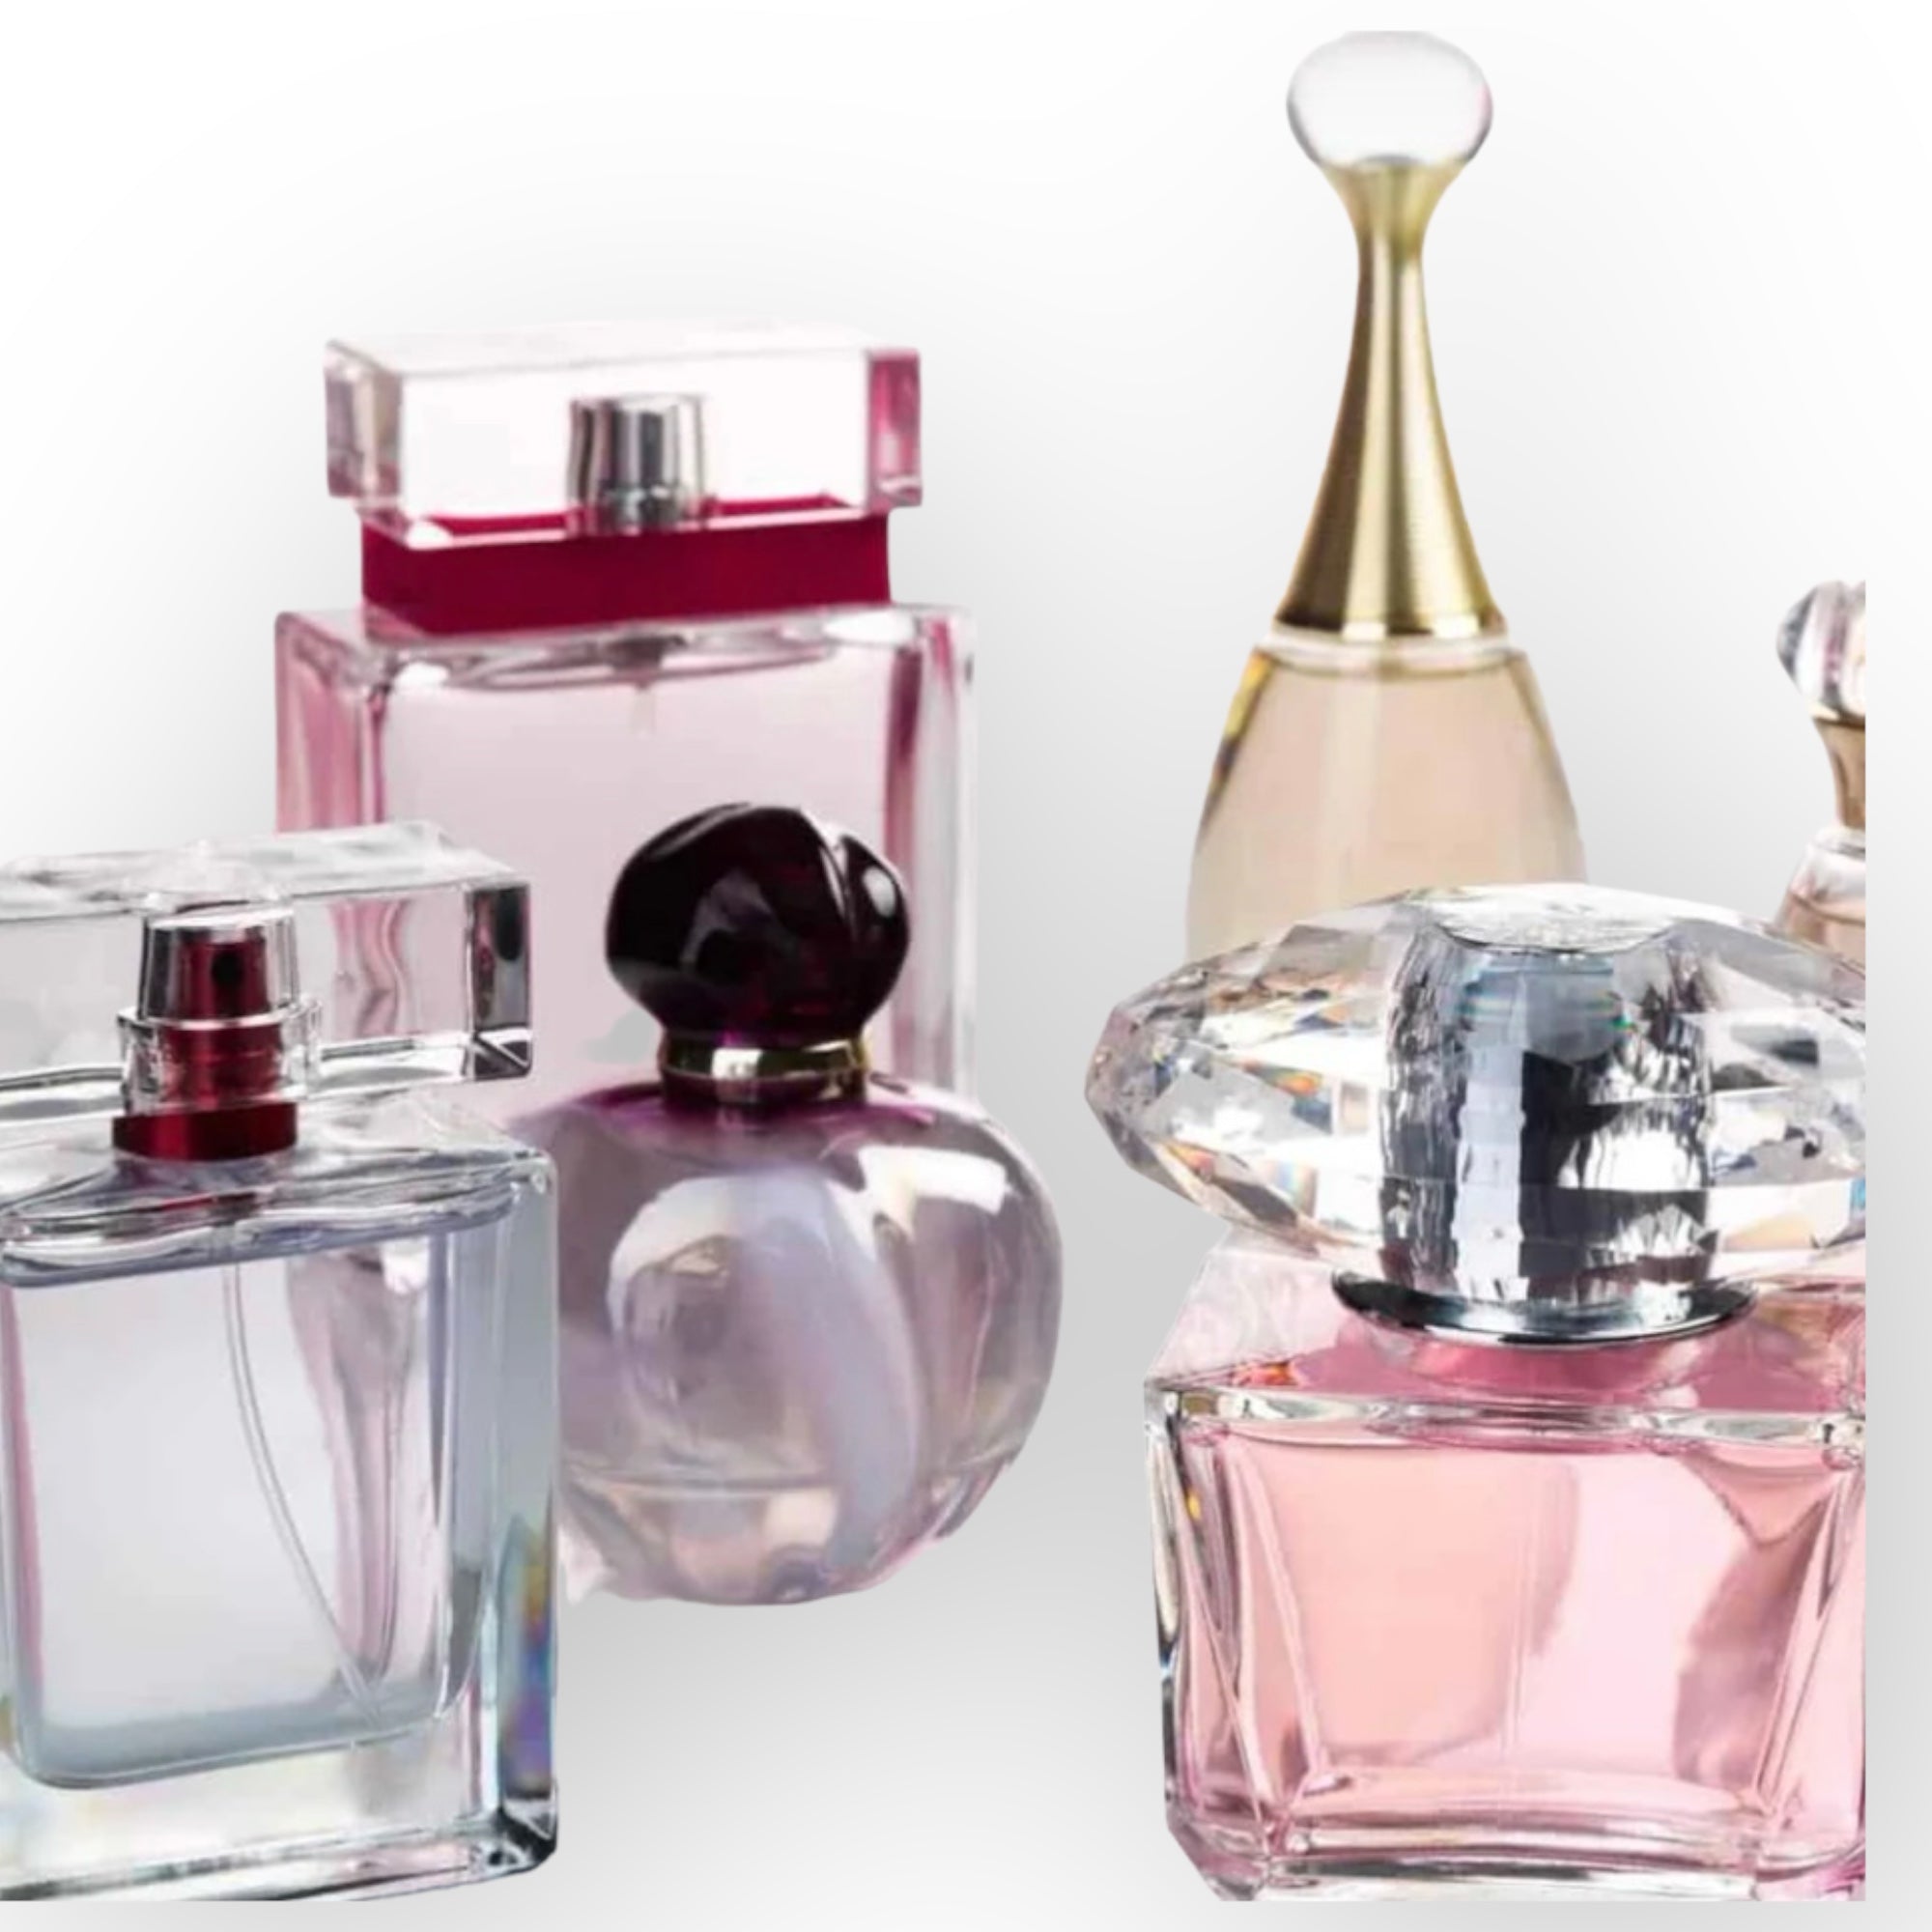 * Assessment & Fragrance Oil Bundle Deal perfume Collection 100ml Scents Save £750 *